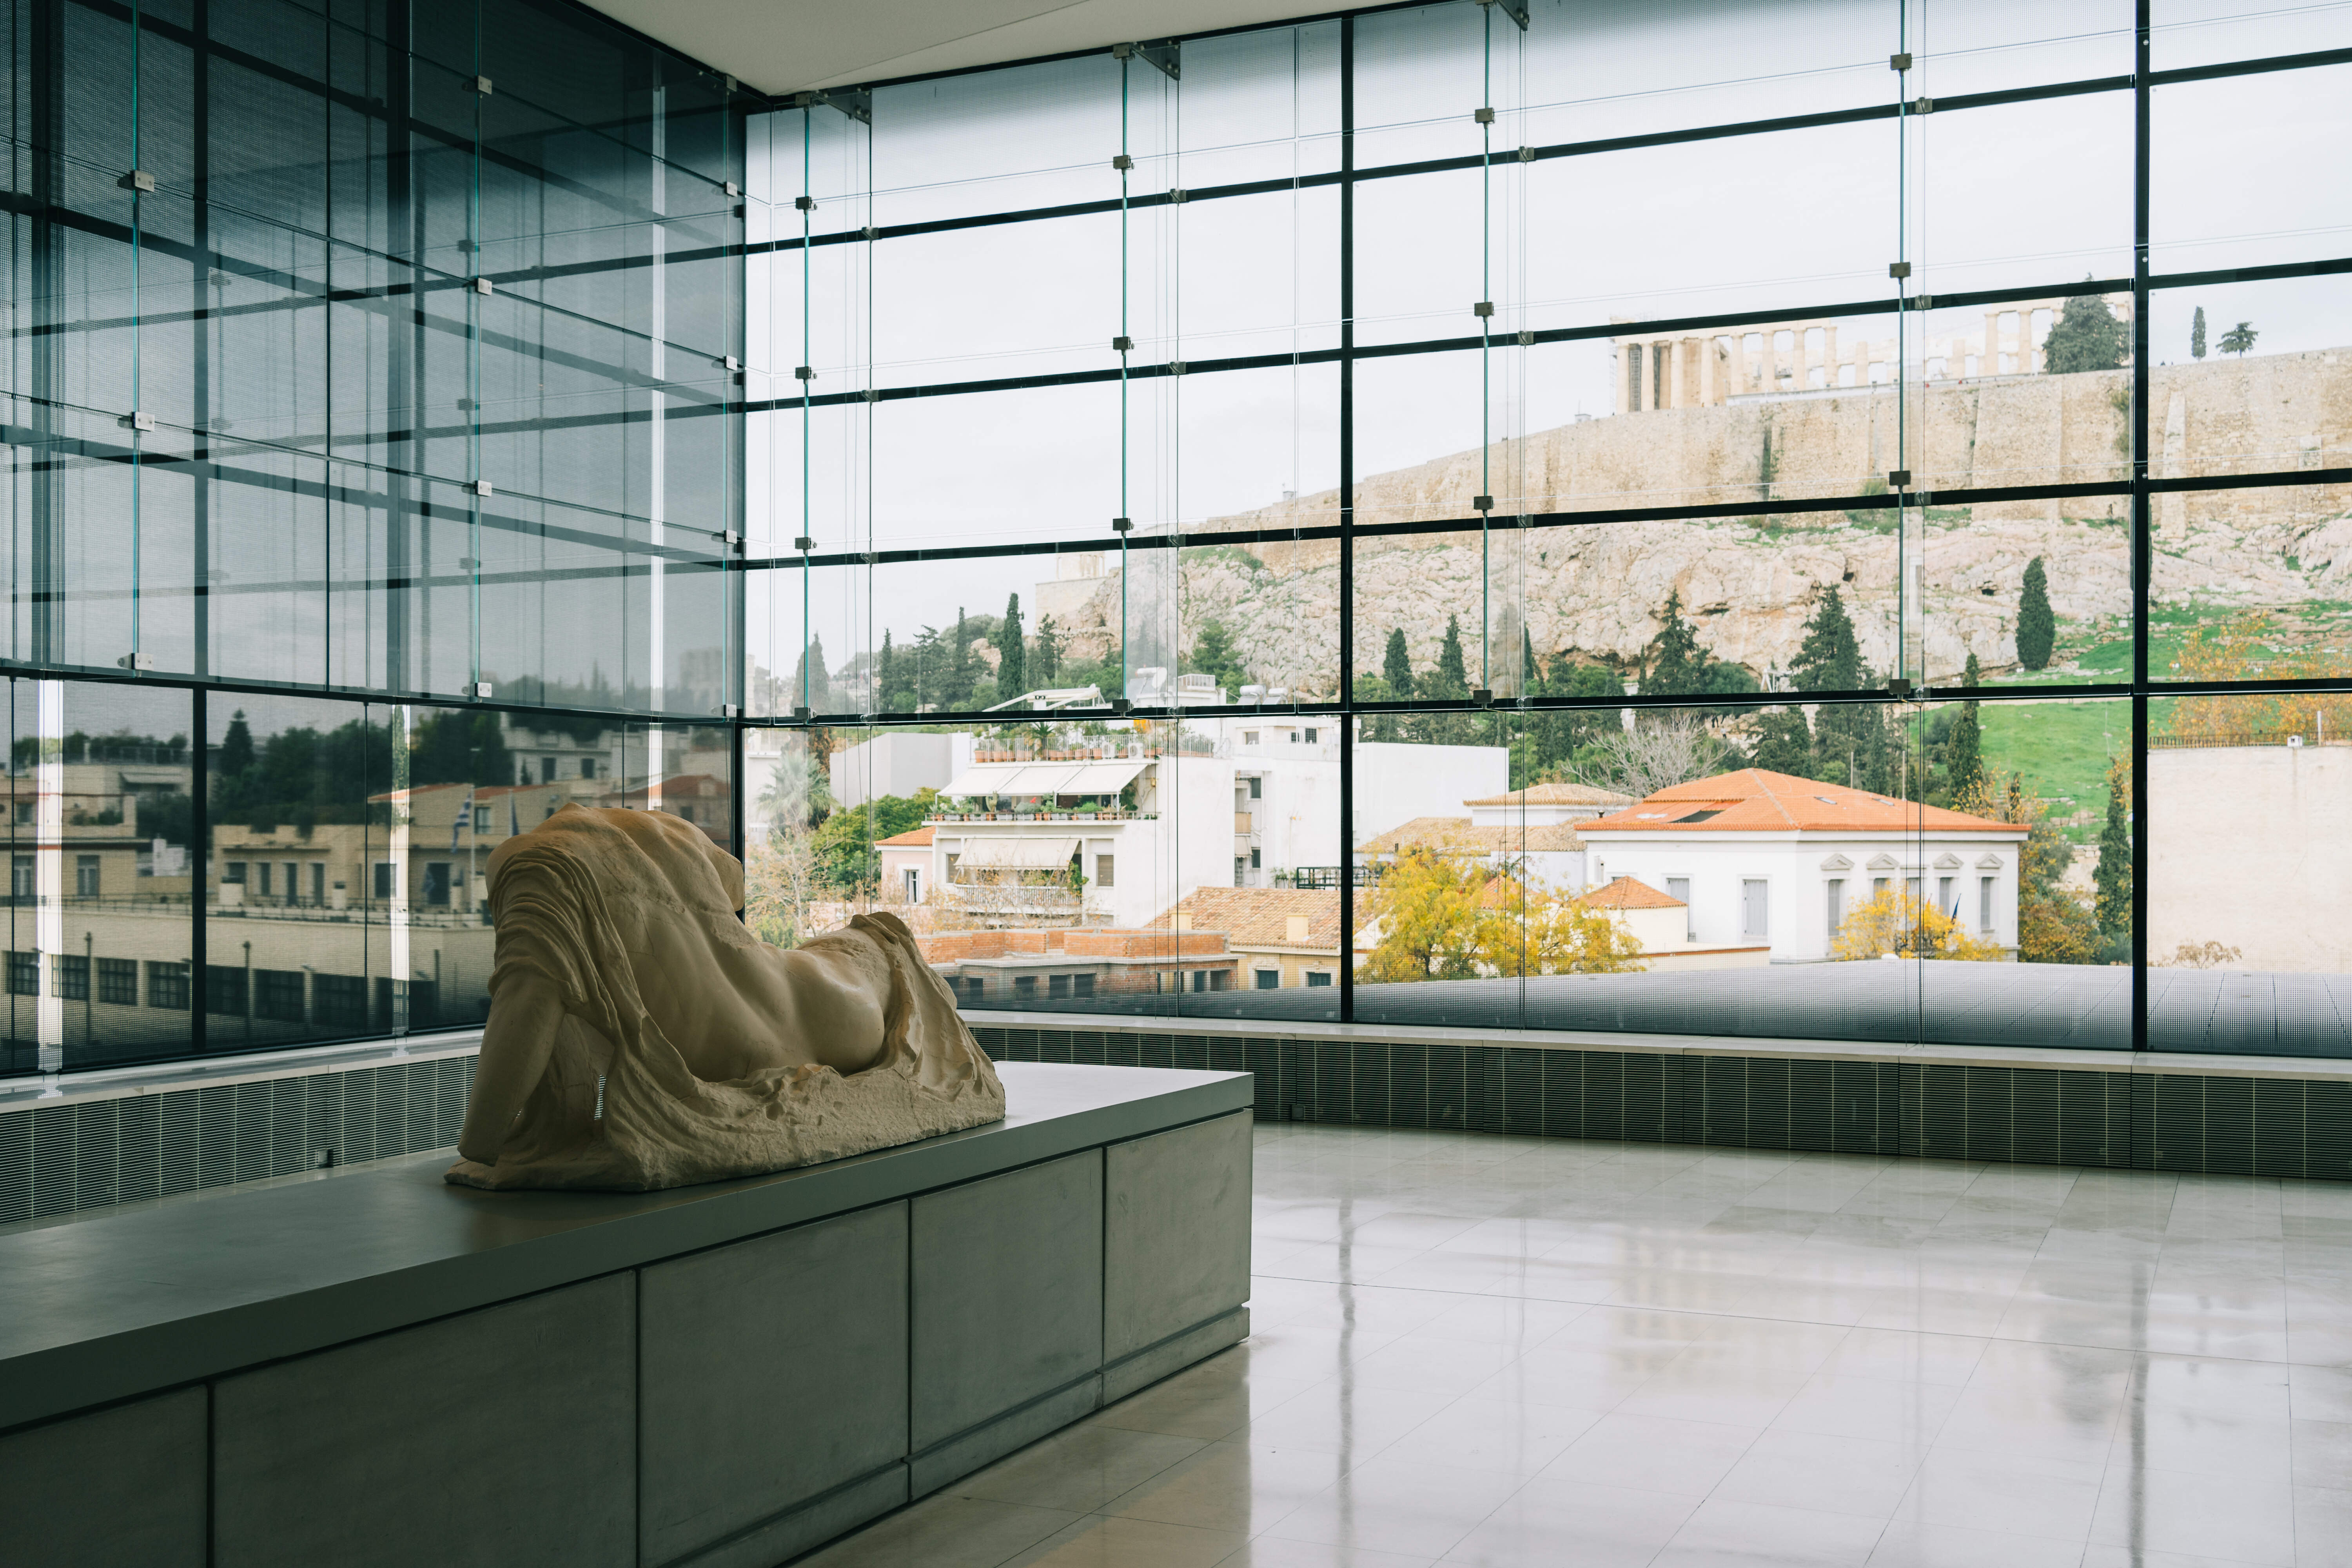 A visit to the New Acropolis museum